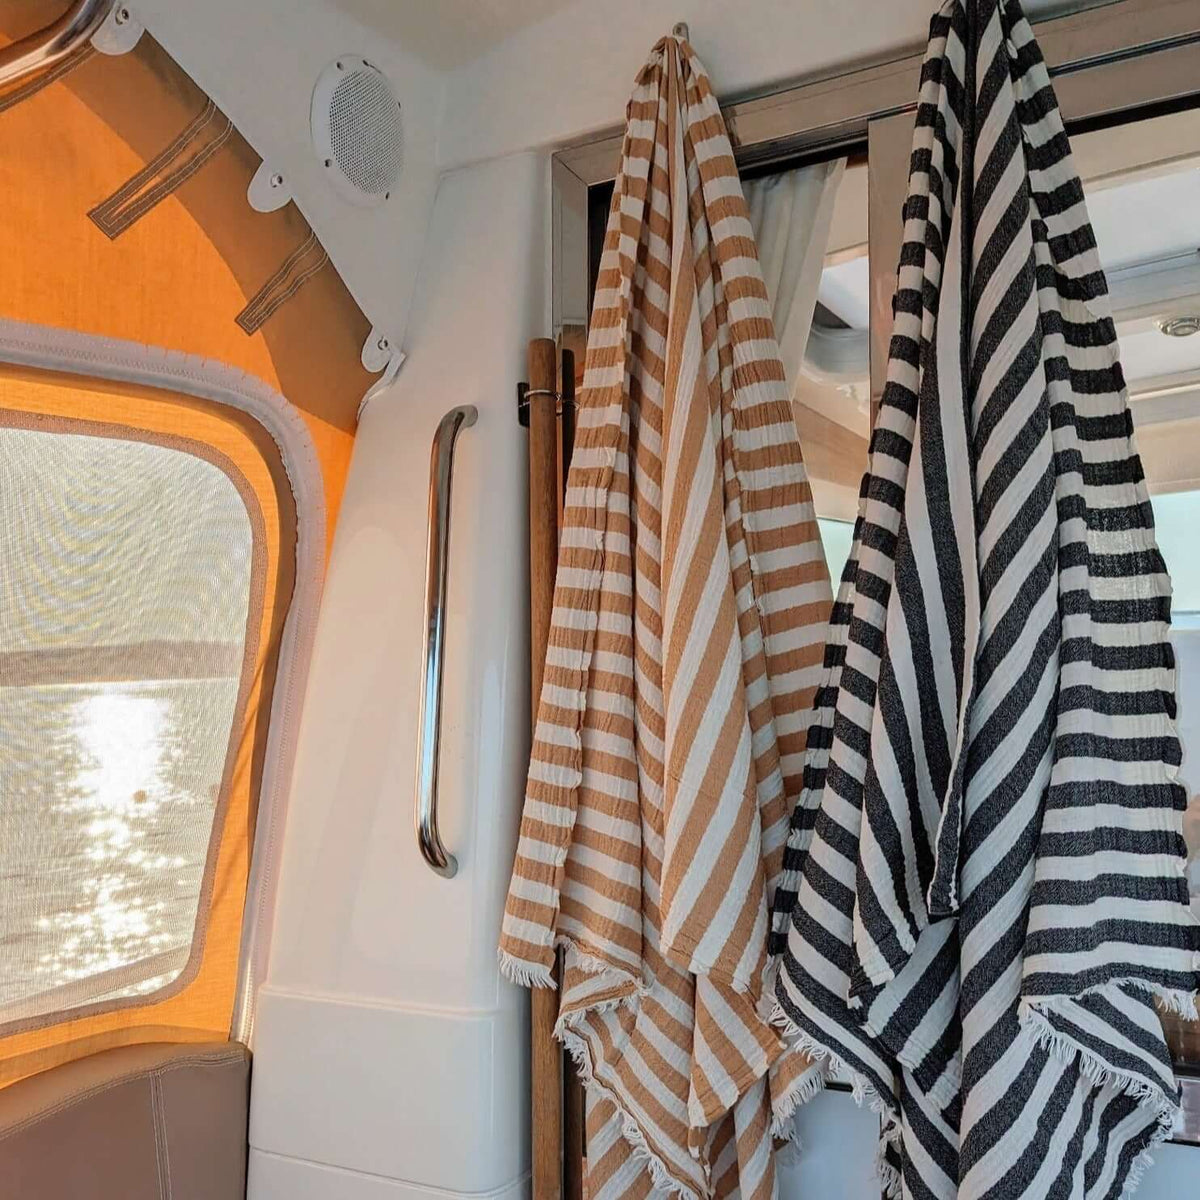 brown and black stripes on white Turkish towels are hanging dry on the boat 